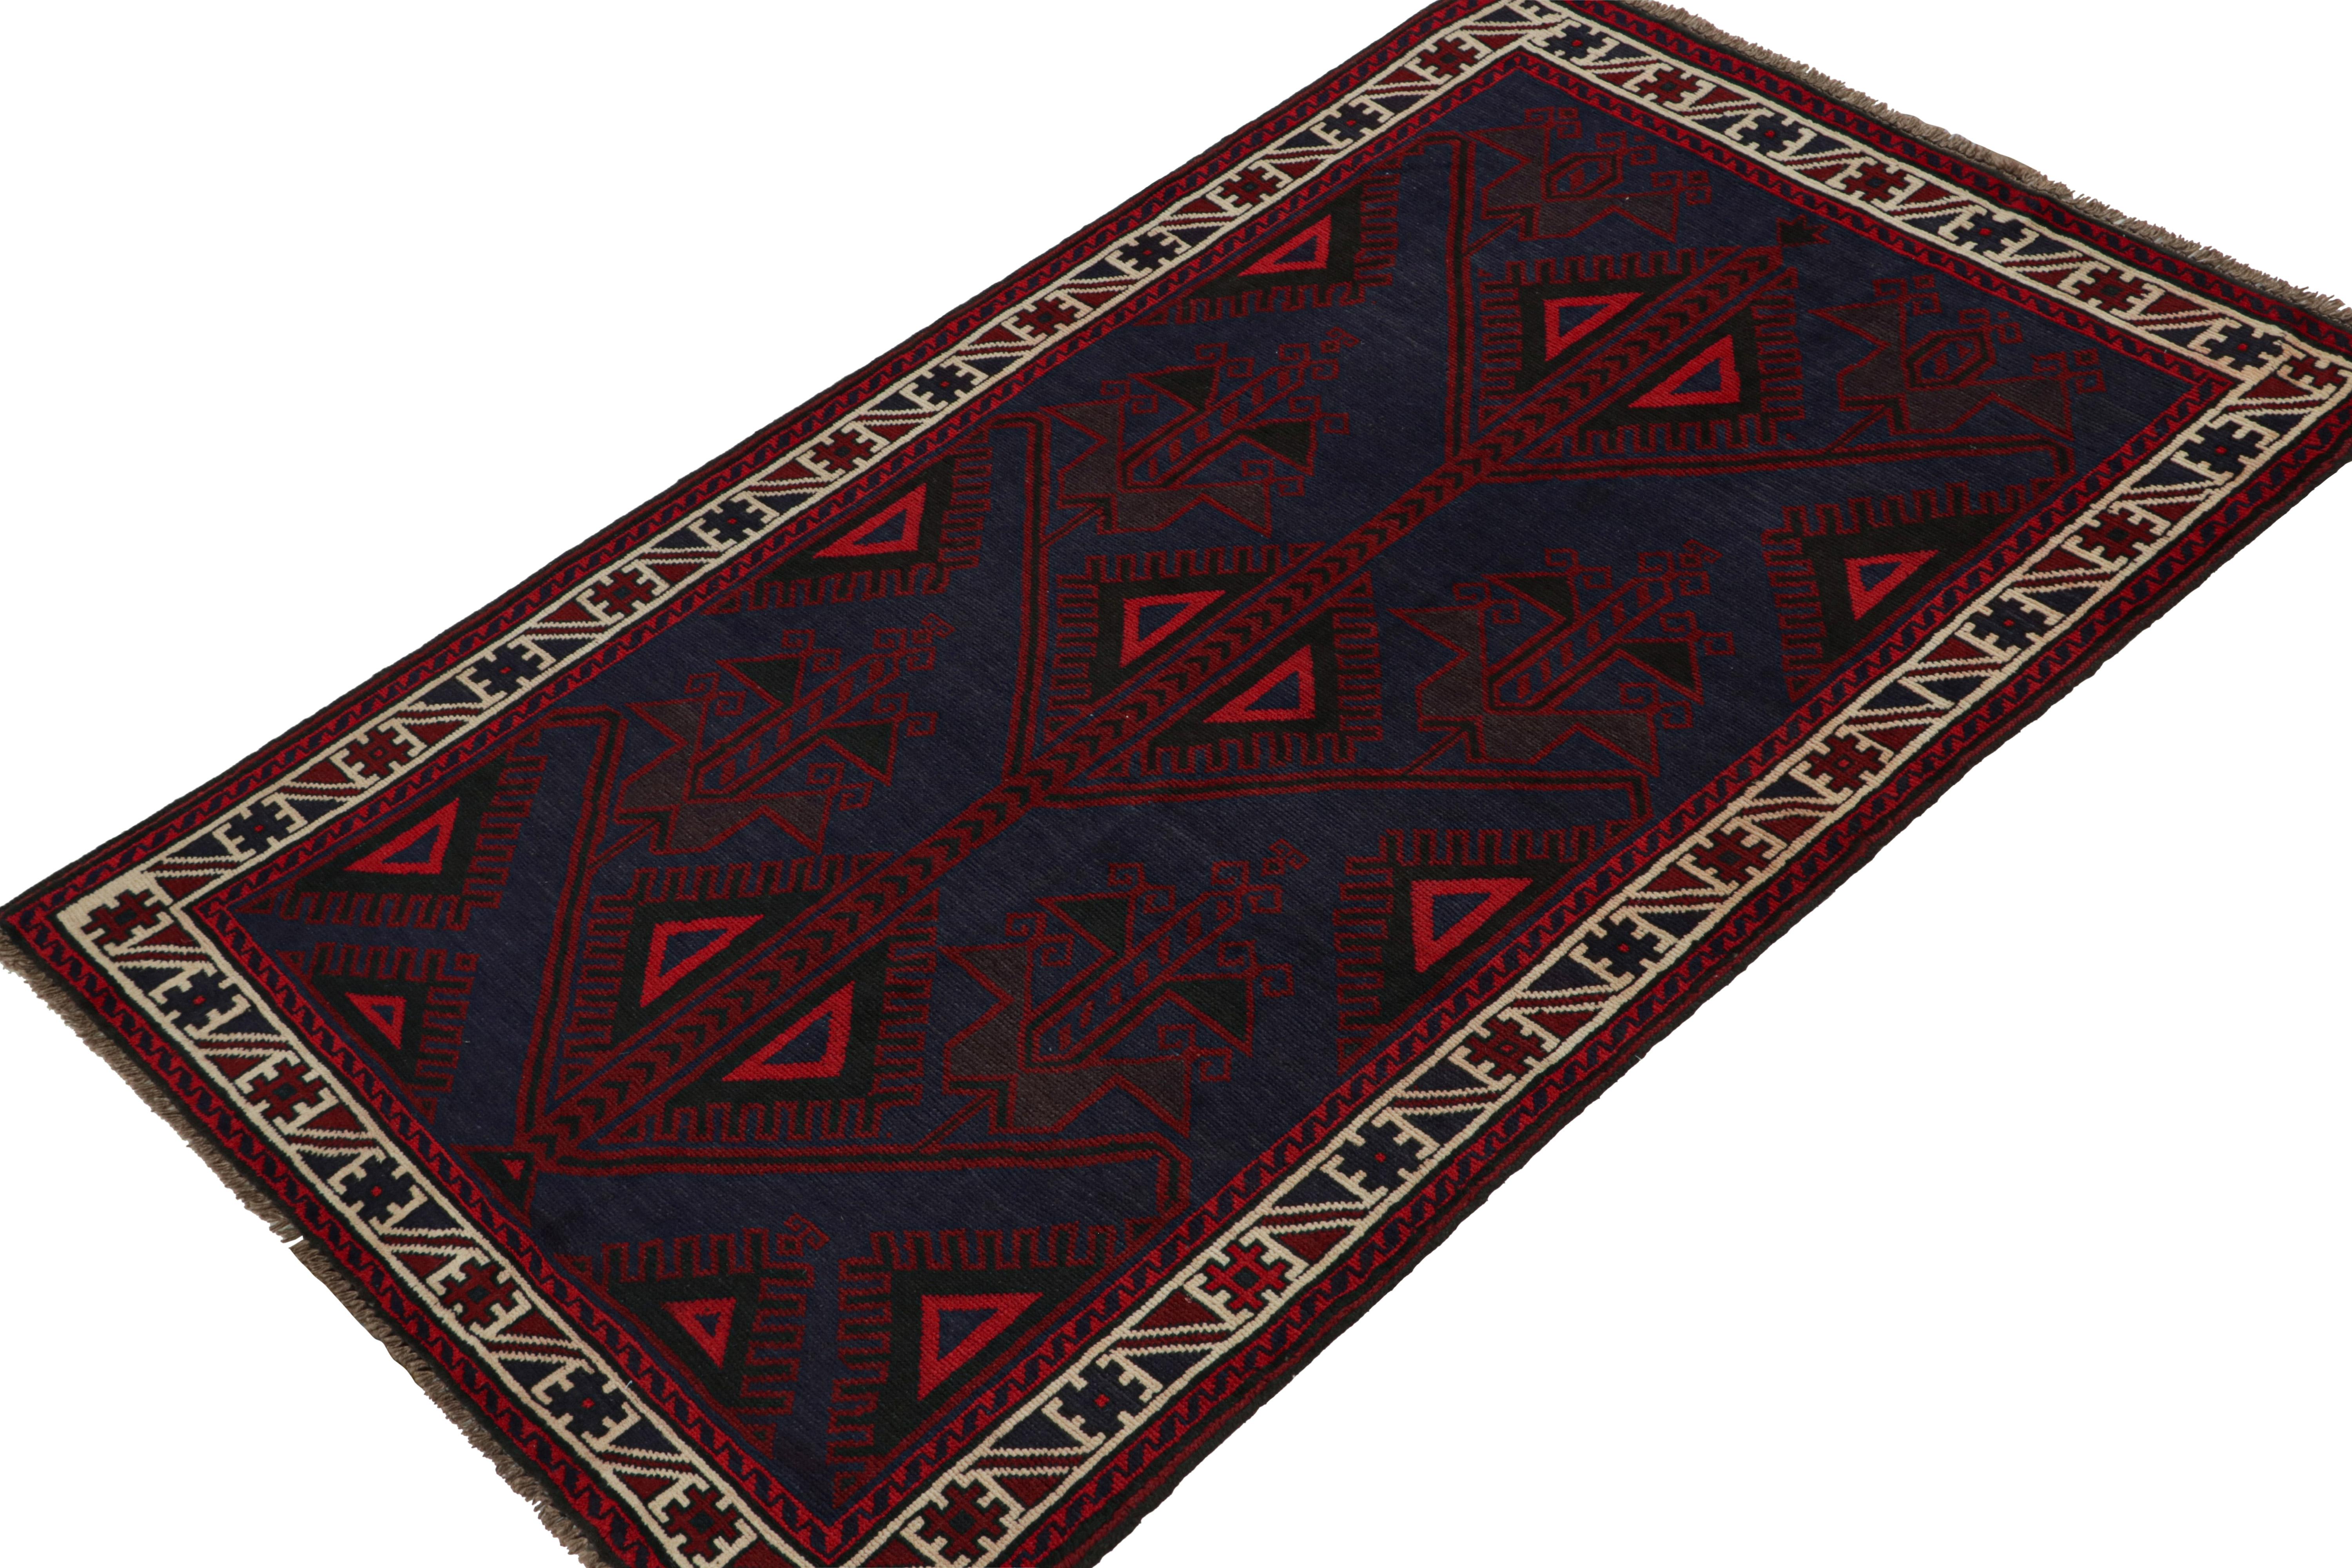 Hand-knotted in wool & goat hair, this vintage tribal rug of the 1950s is a coveted addition to Rug & Kilim’s Antique & Vintage collection. 

On the Design: 

Coming from the Baluch tribe, this 4x7 rug boasts traditional patterns in rich tones of